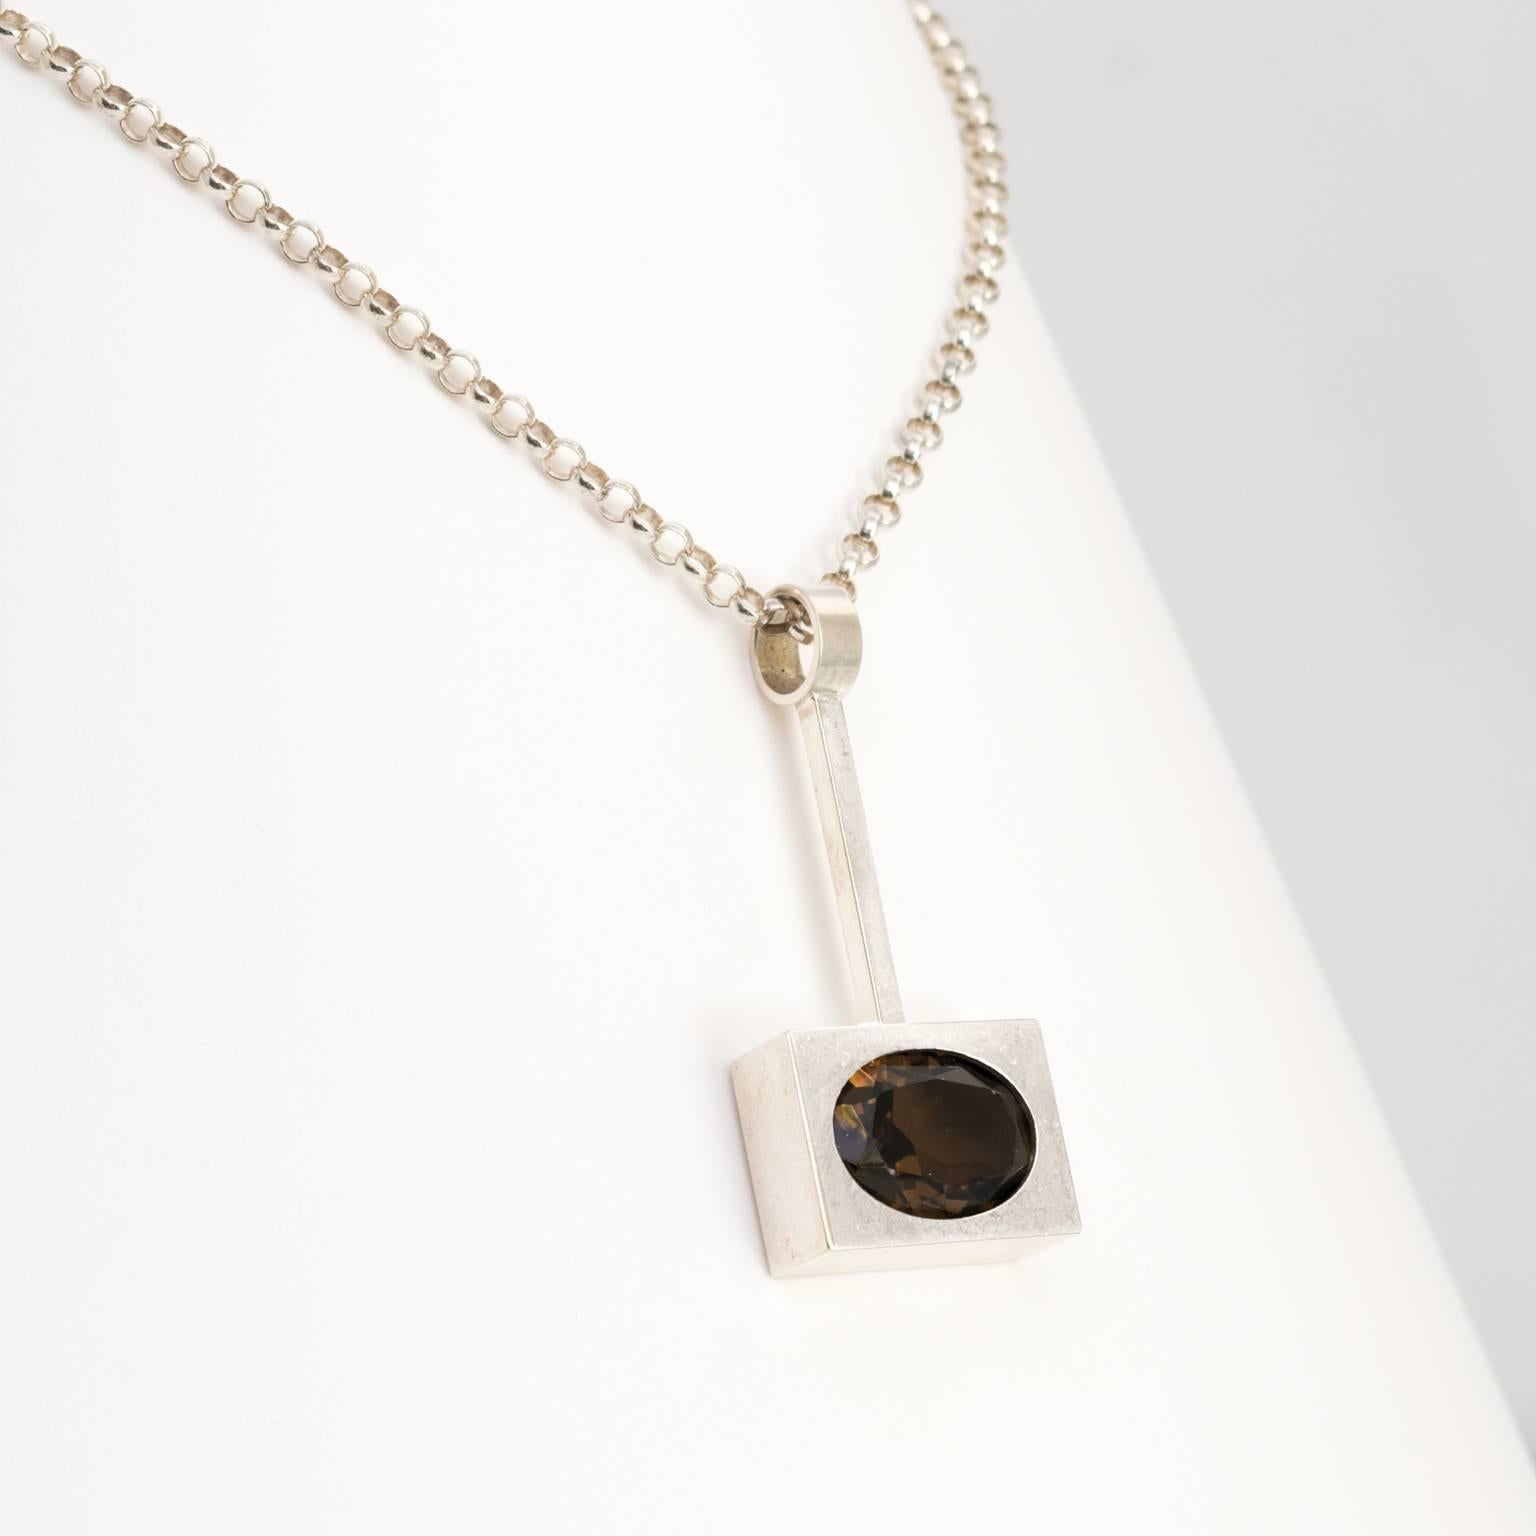 Silver Scandinavian modern pendant with an inserted oval faceted smoky quartz stone. The chain is also silver. Designed by Kupitaan Kulta, Finland. 
 
Measures: Chain length: 16".
Pendant height: 2".